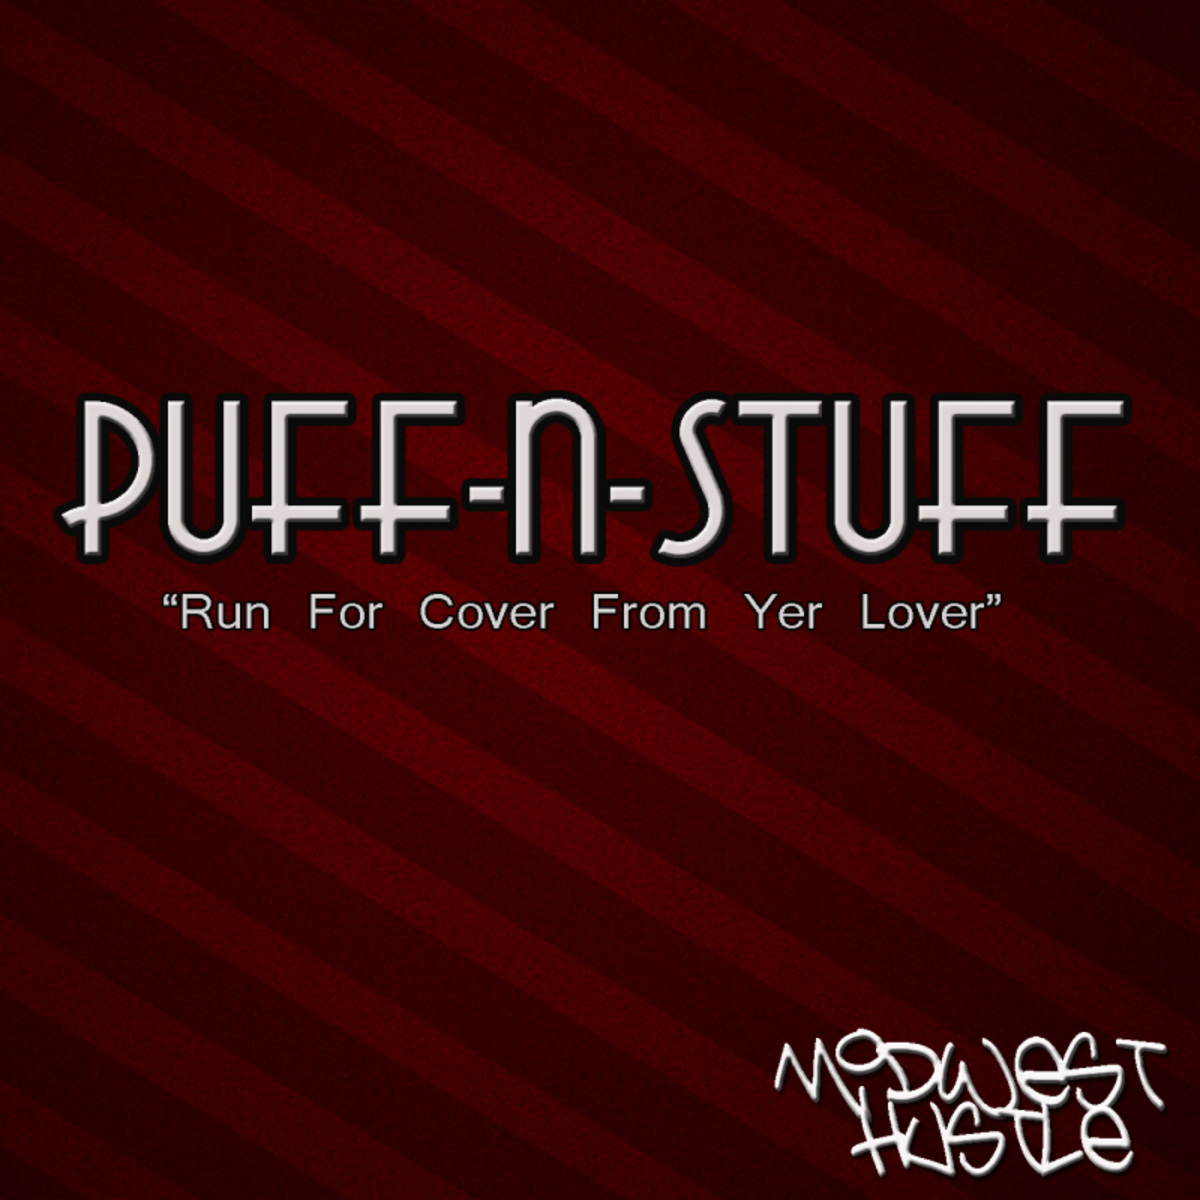 Puff-N-Stuff - Run For Cover From Yer Lover / Midwest Hustle Music